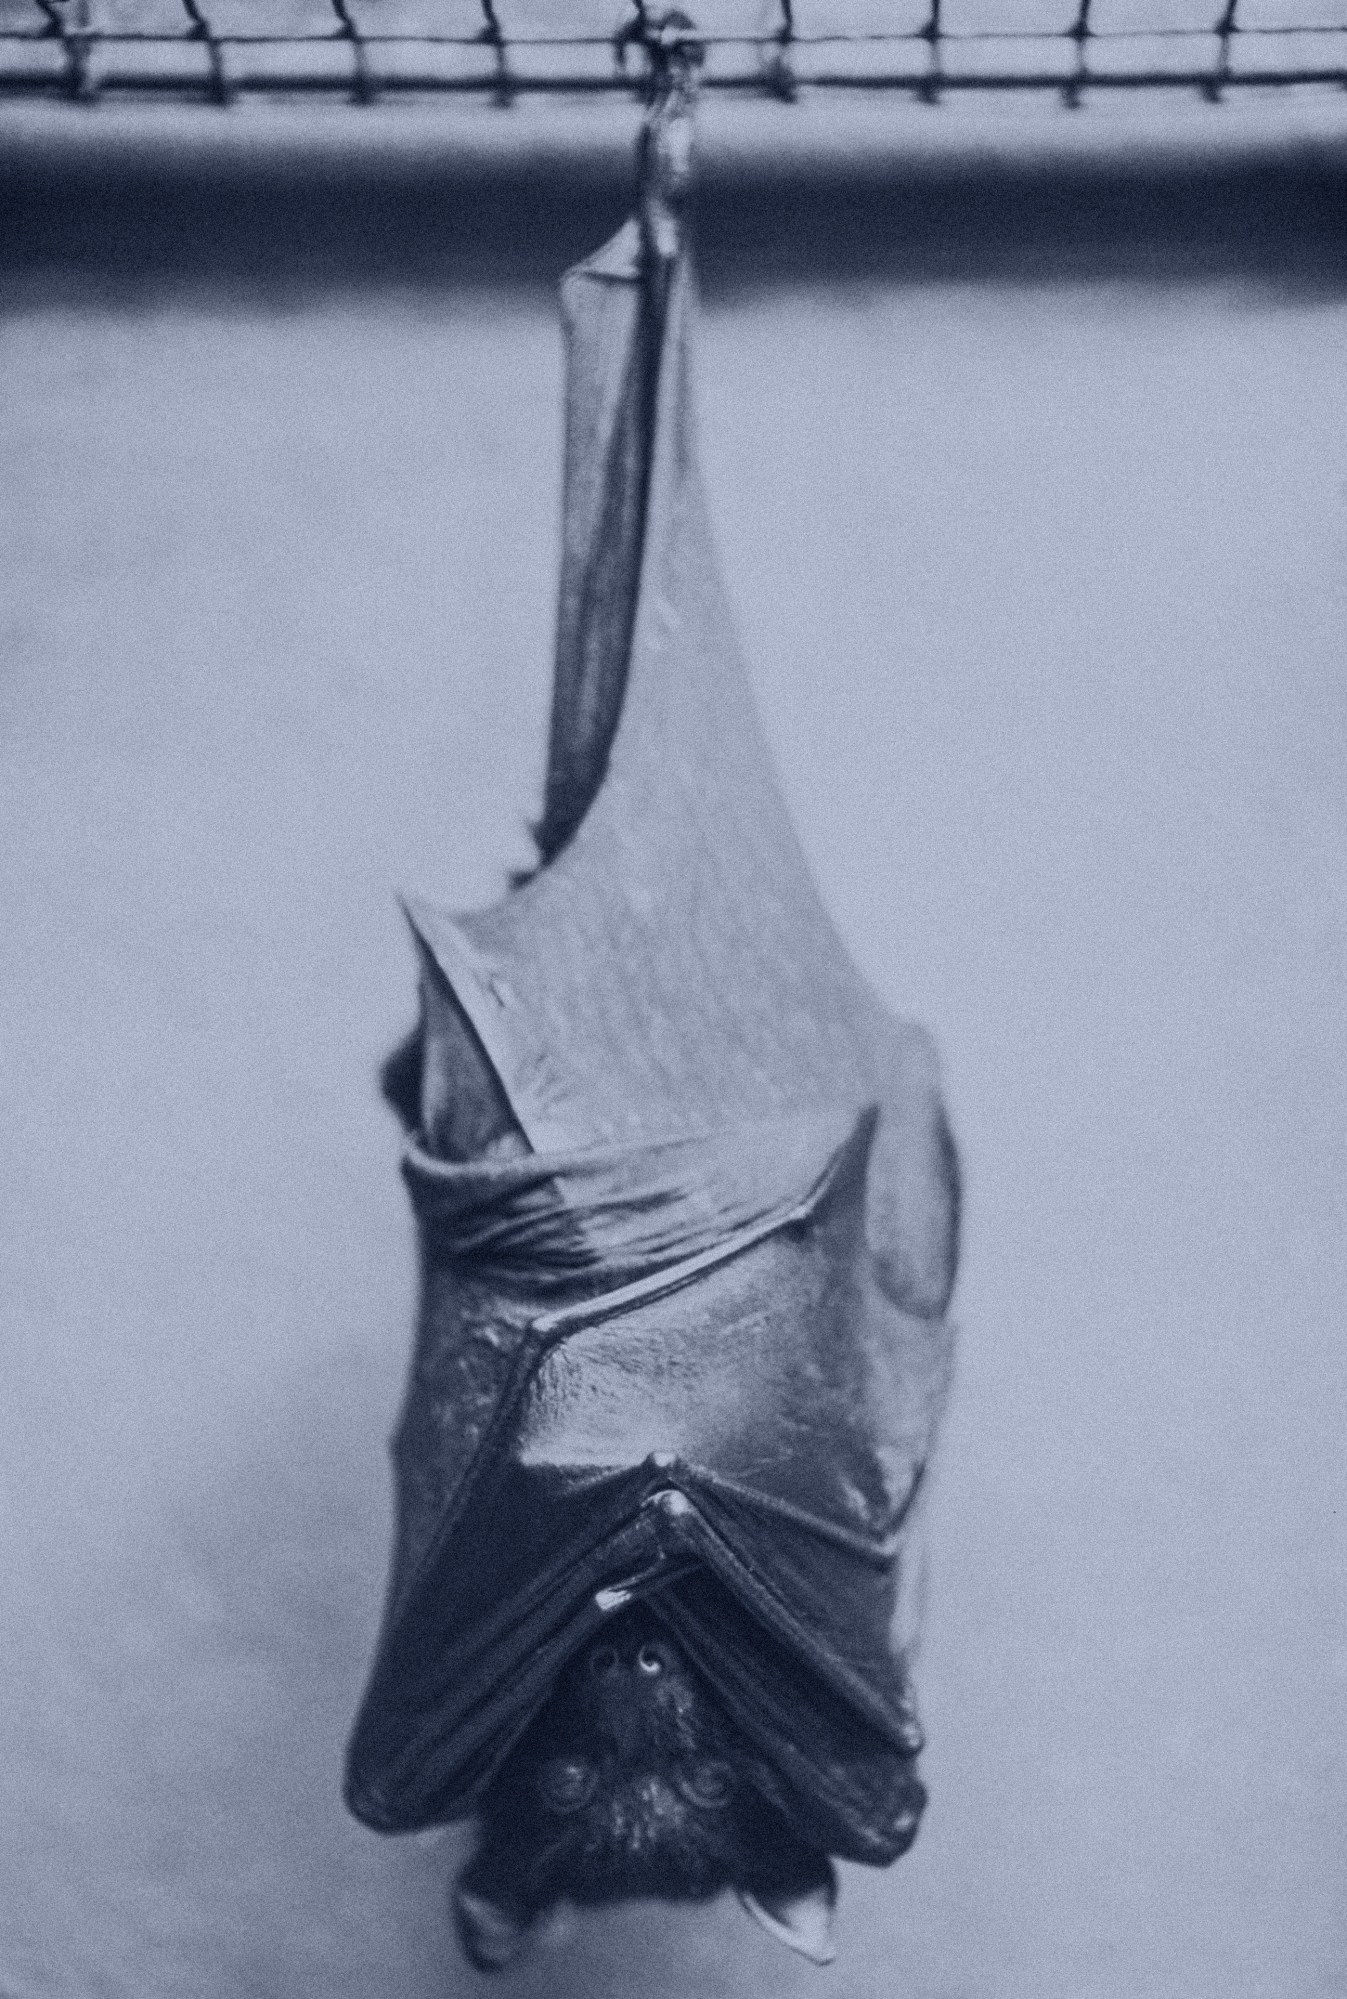 Bat Hanging in Cage